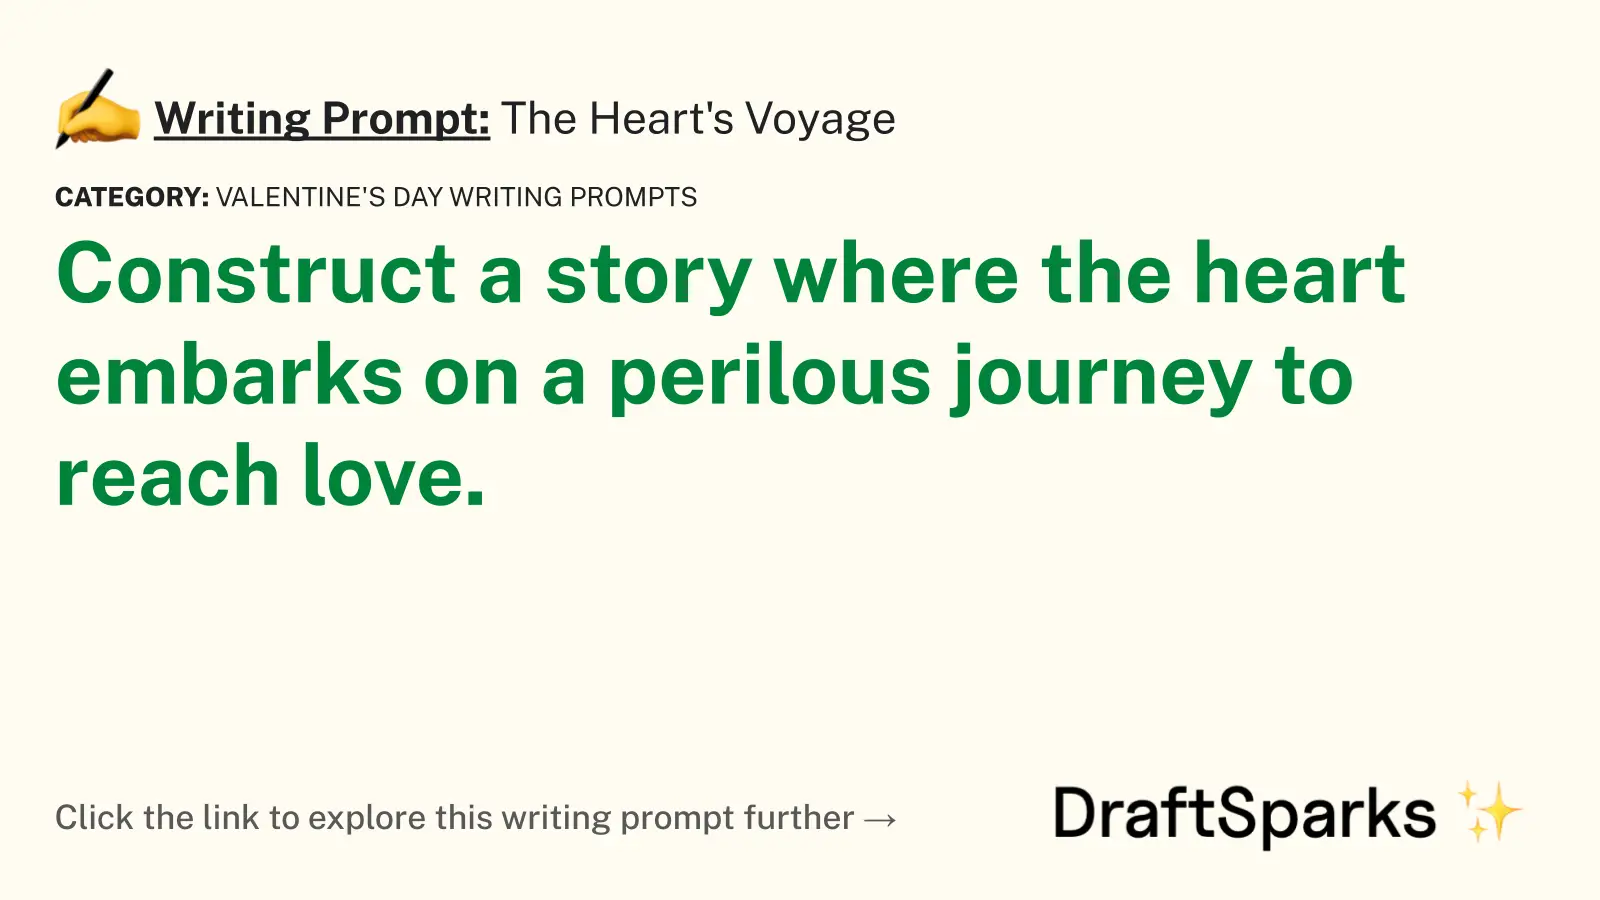 The Heart’s Voyage